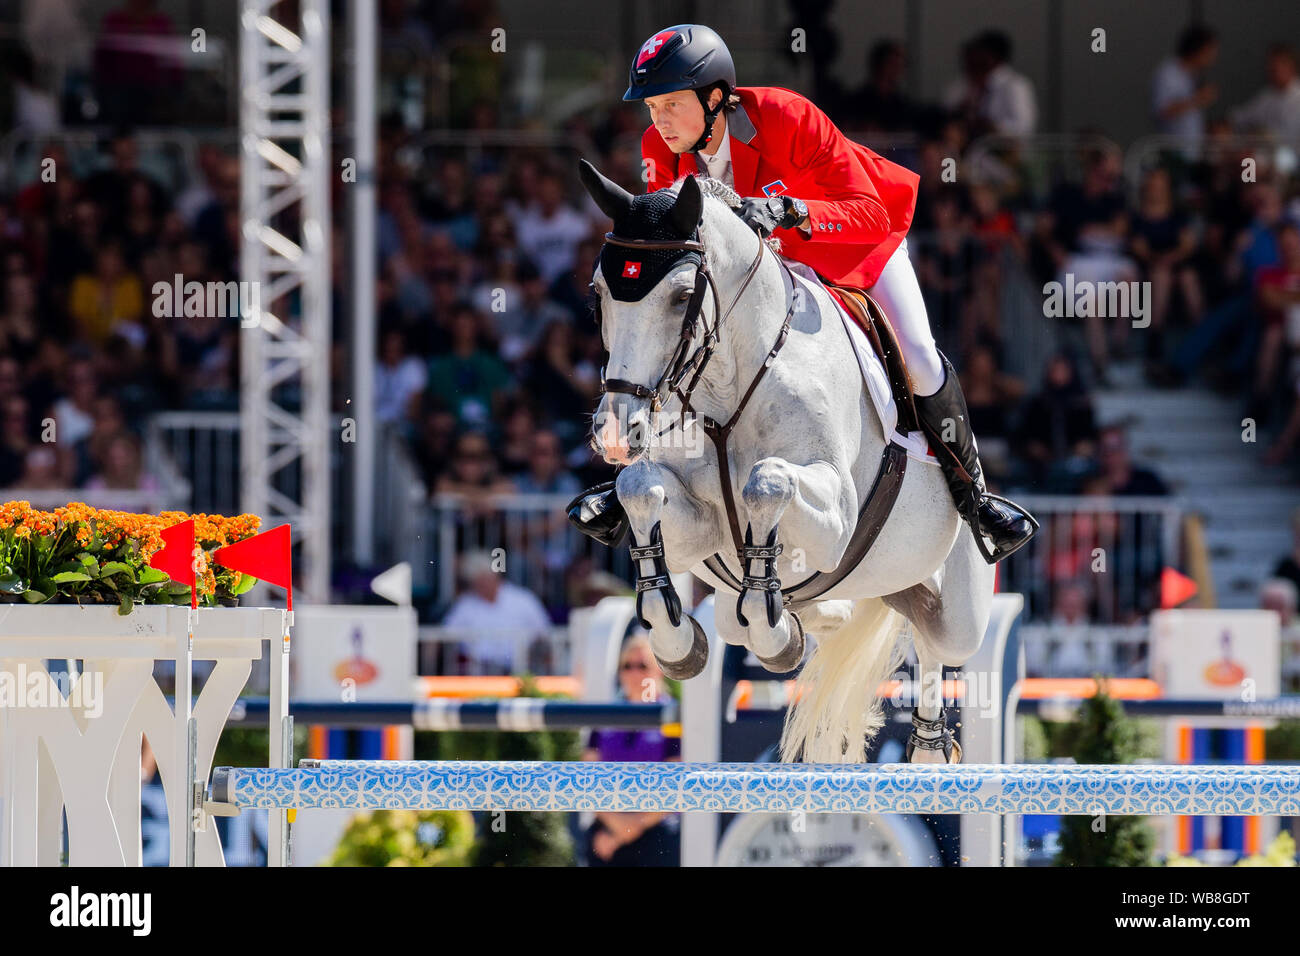 Rotterdam, Netherlands. 25th Aug, 2019. European Championships, equestrian sport, jumping, finals, singles: The rider Martin Fuchs from Switzerland on the horse Clooney jumps over an obstacle. Credit: Rolf Vennenbernd/dpa/Alamy Live News Stock Photo